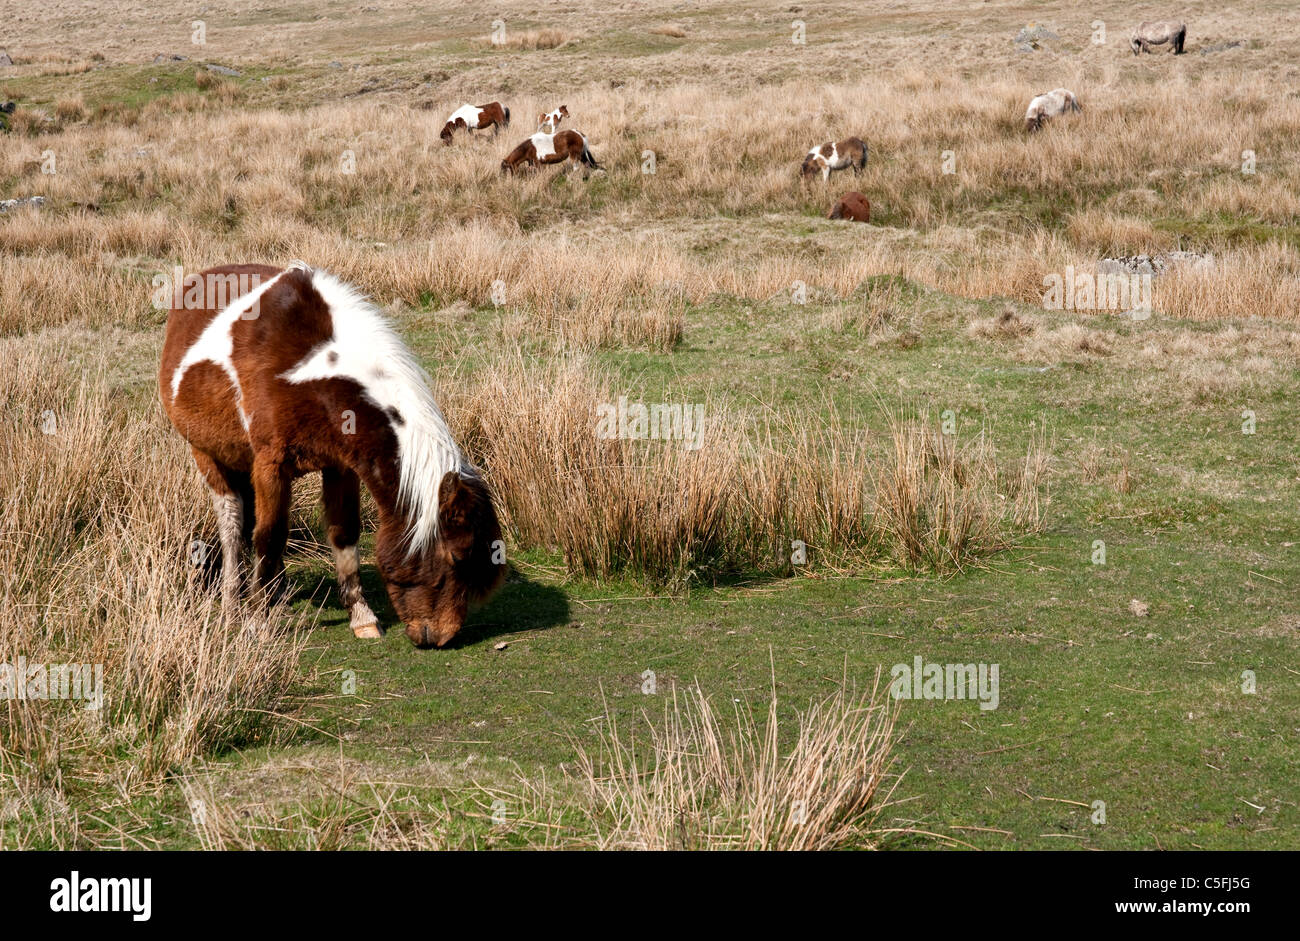 A landscape long shot of a small Dartmoor pony grazing in the foreground with a herd in the background Stock Photo